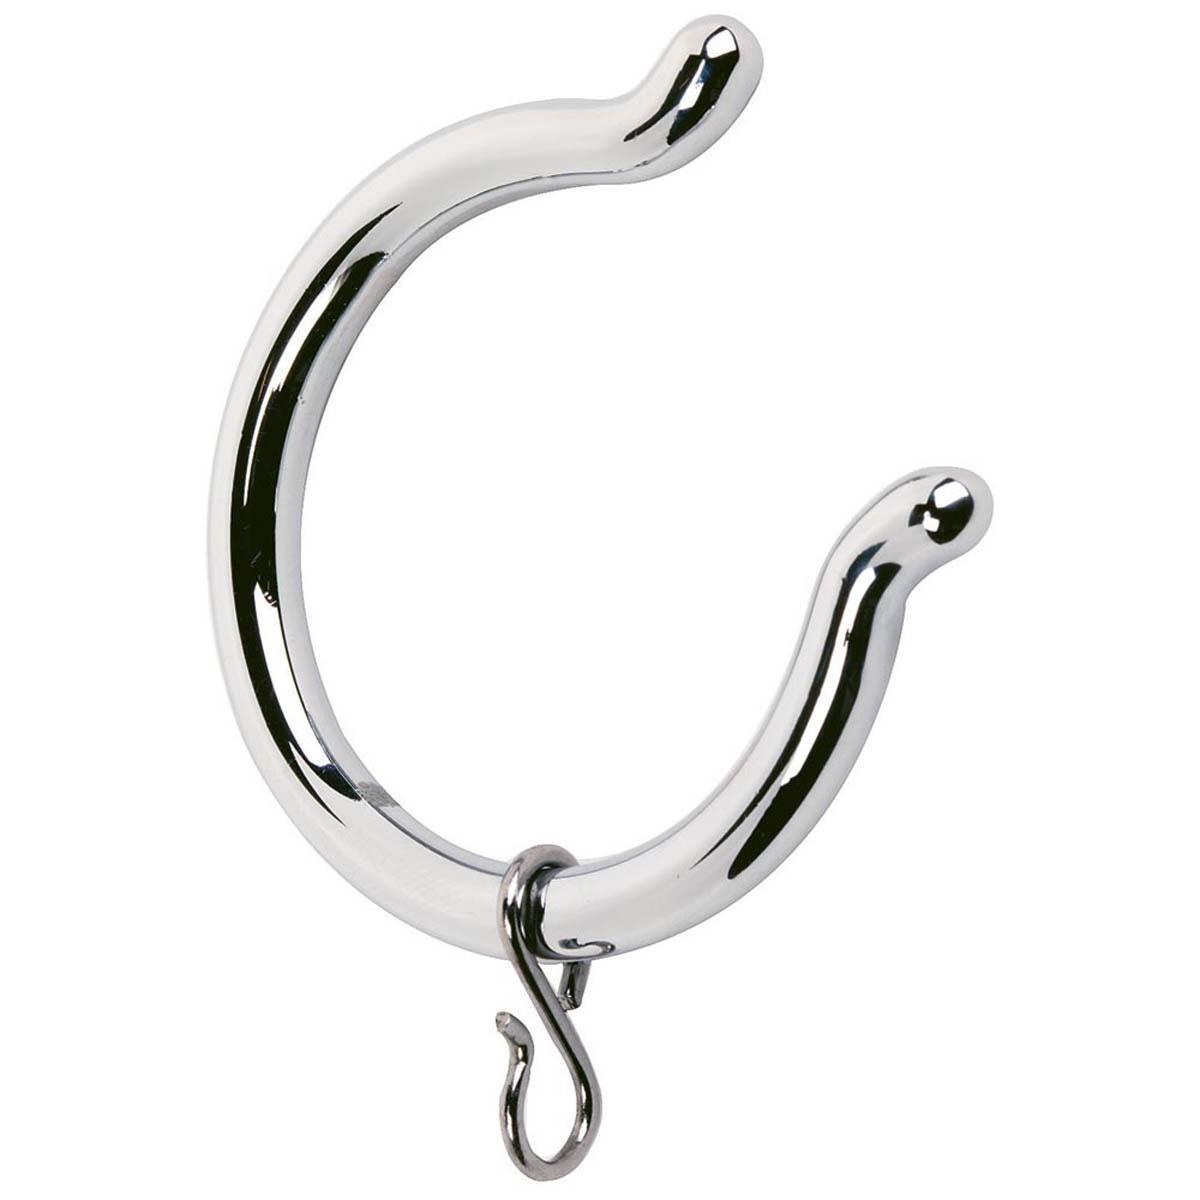 Swish Mix and Match 28mm Pass-Over Bay Pole Rings Chrome